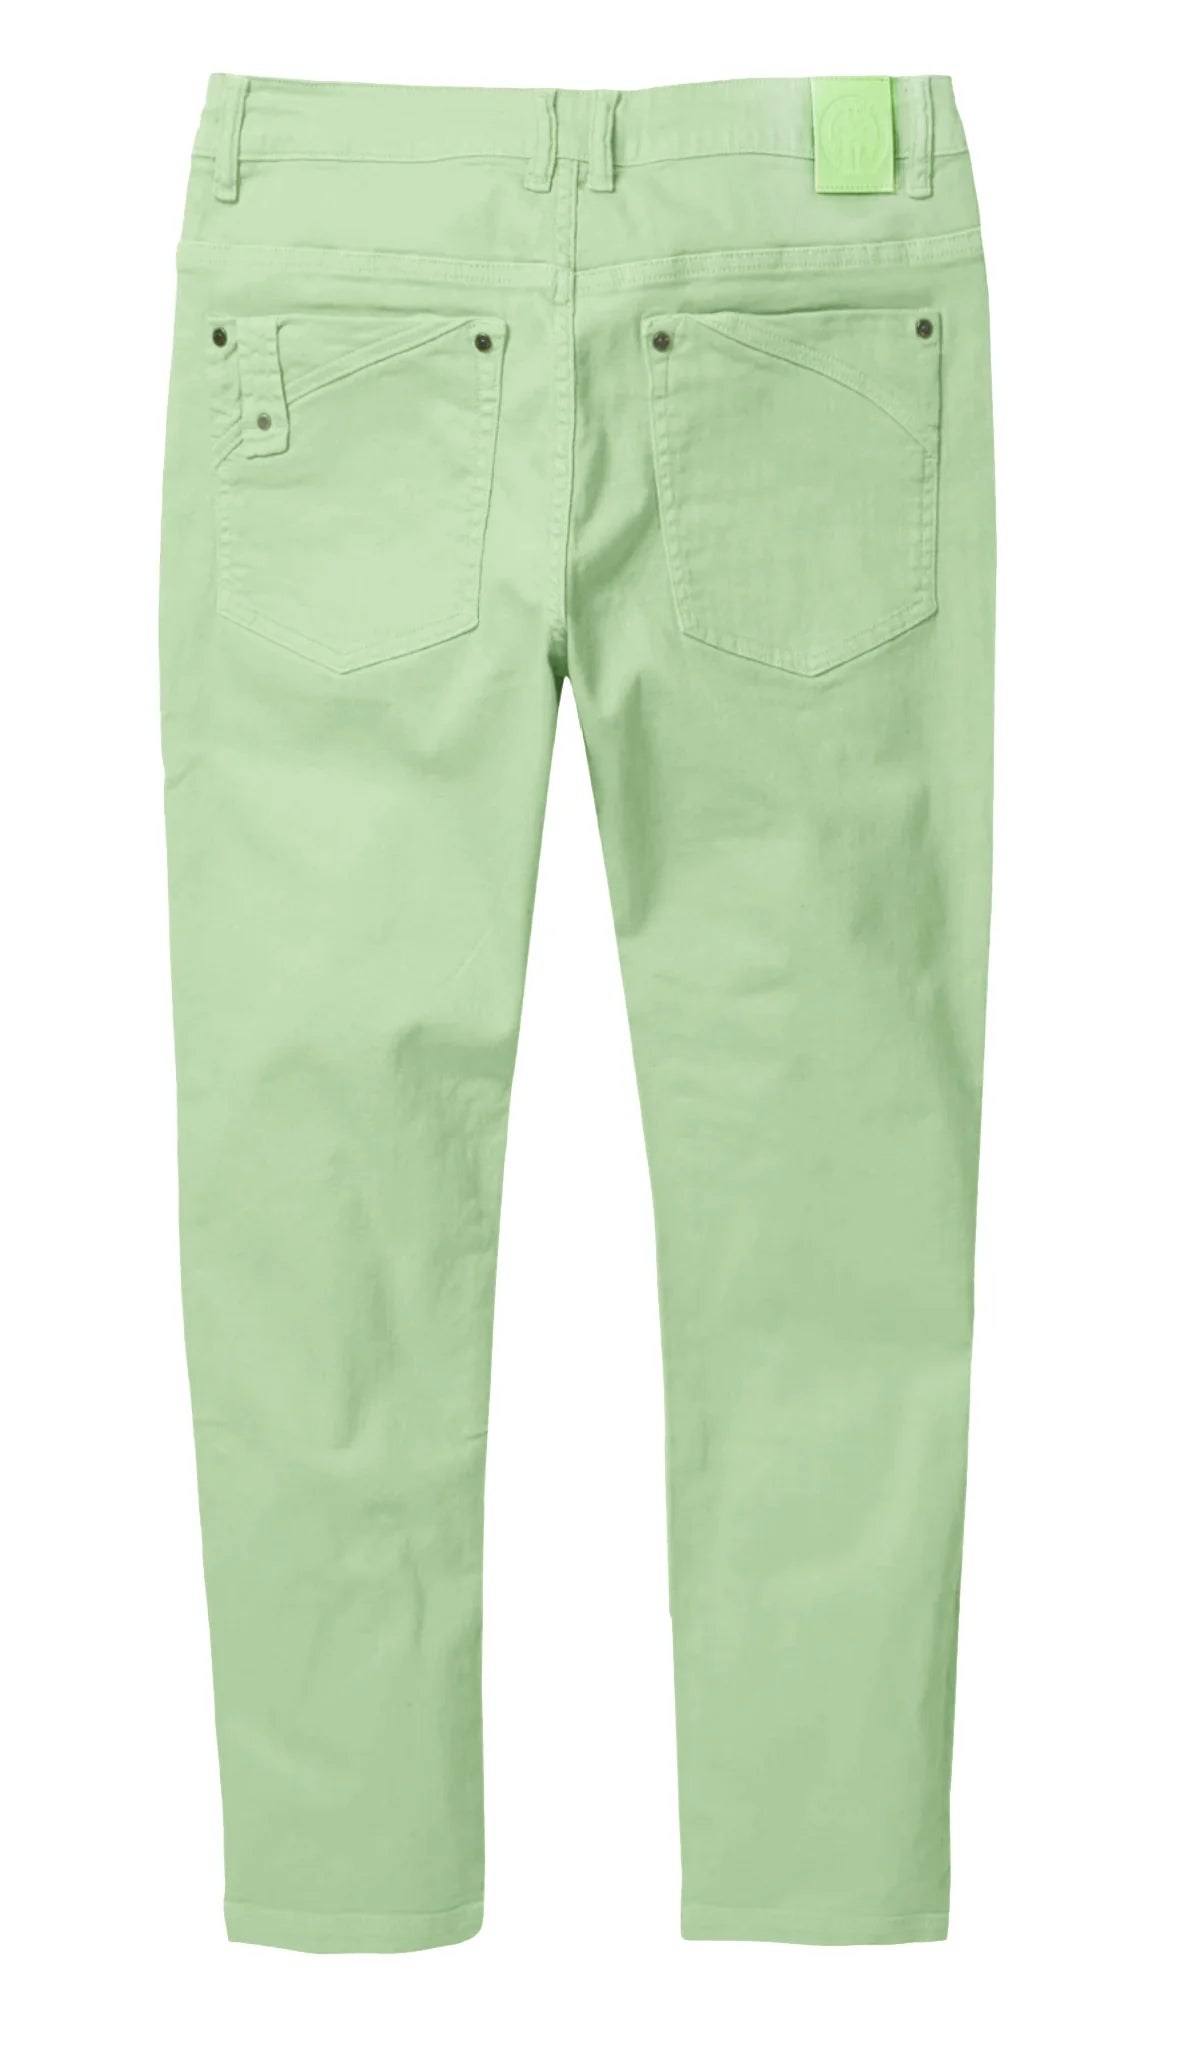 Born Fly Mint Jeans